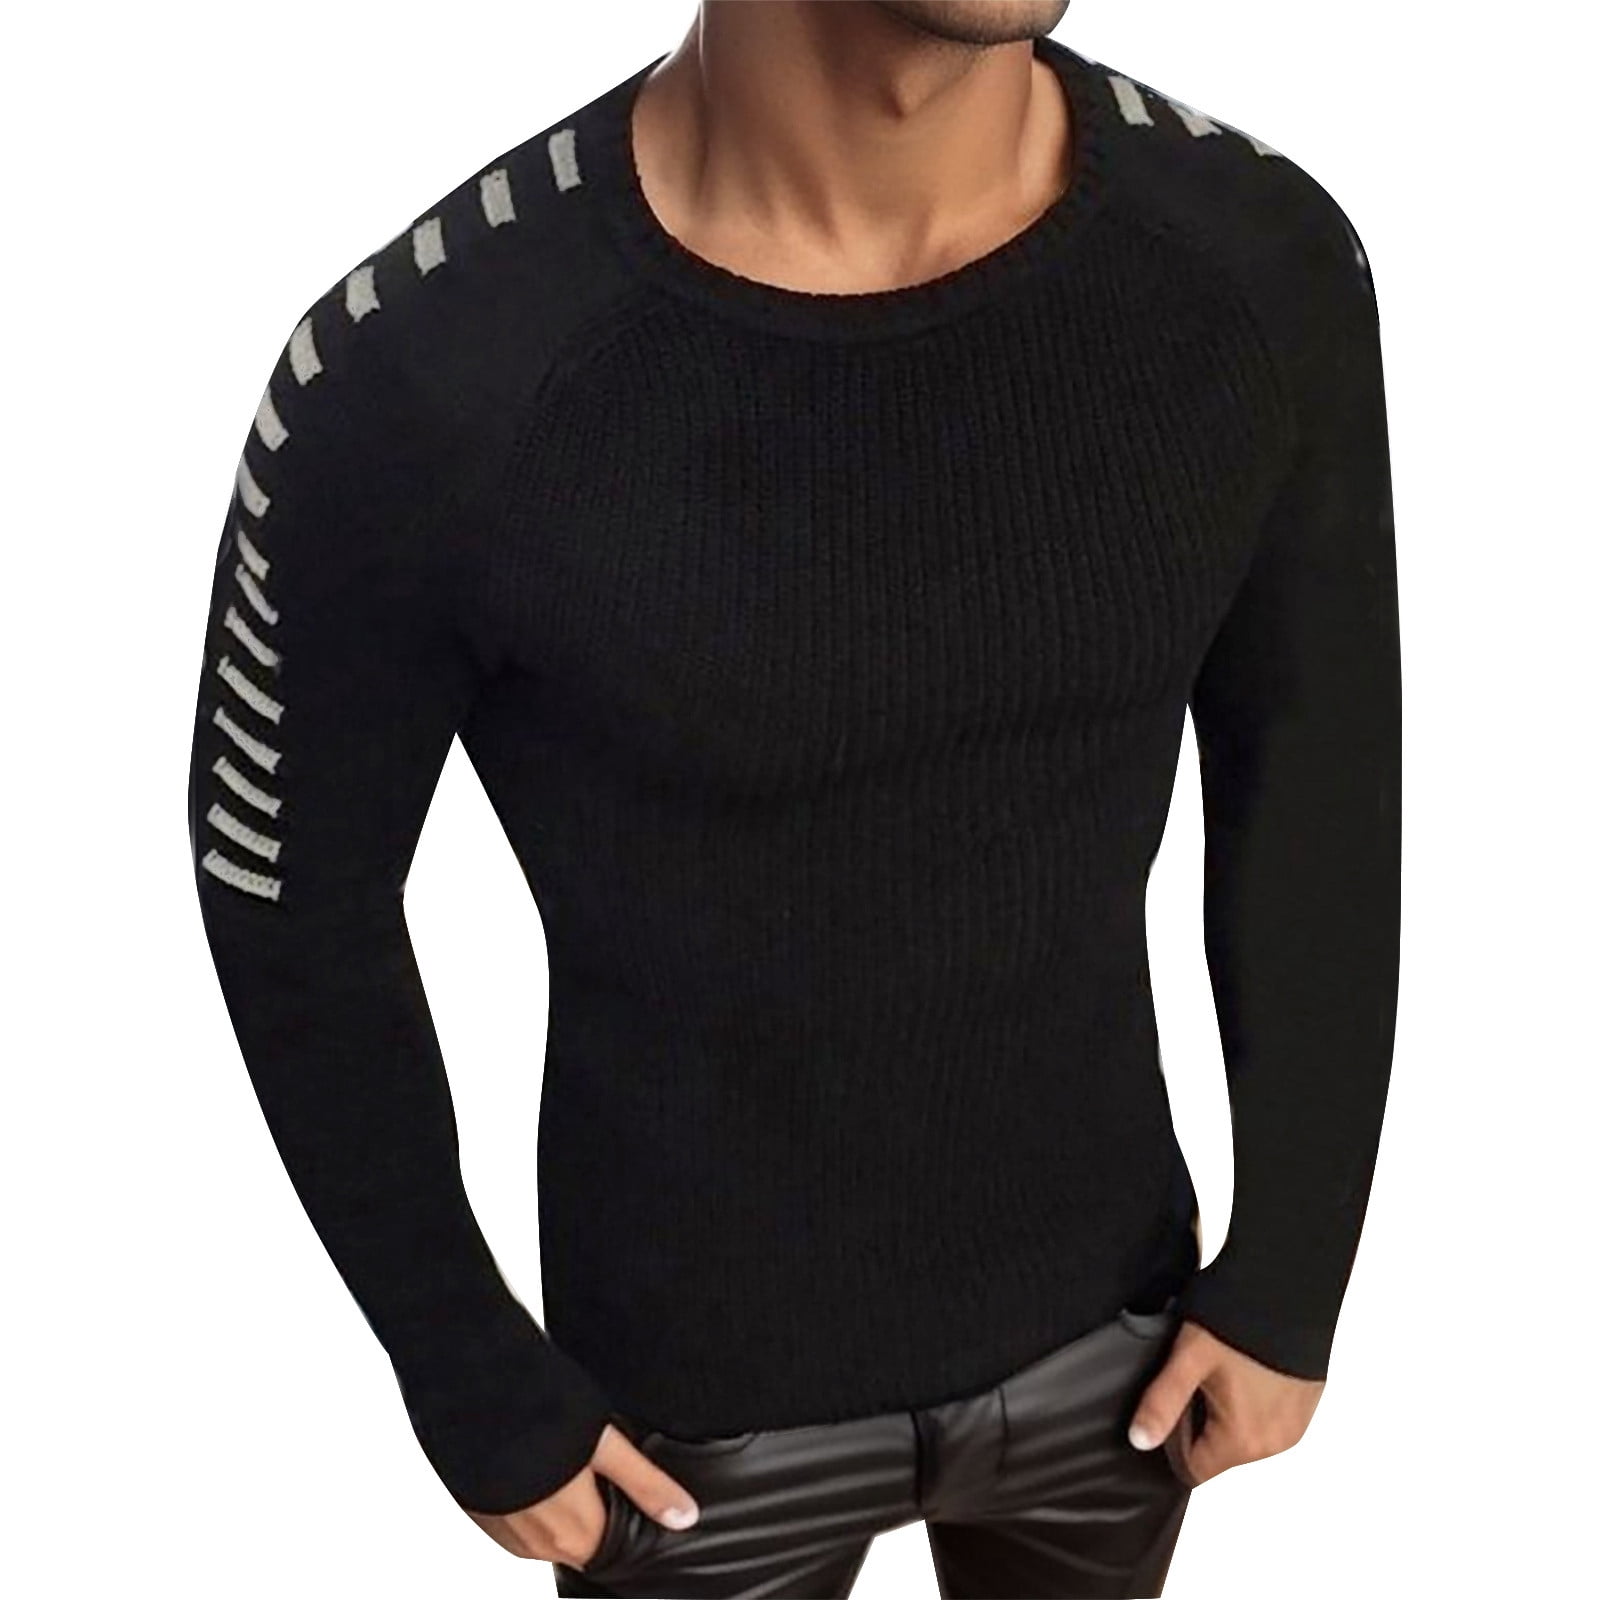 Mens Shirts Winter Long Sleeve Solid Knitted Sweatshirts Pullover Tops ...